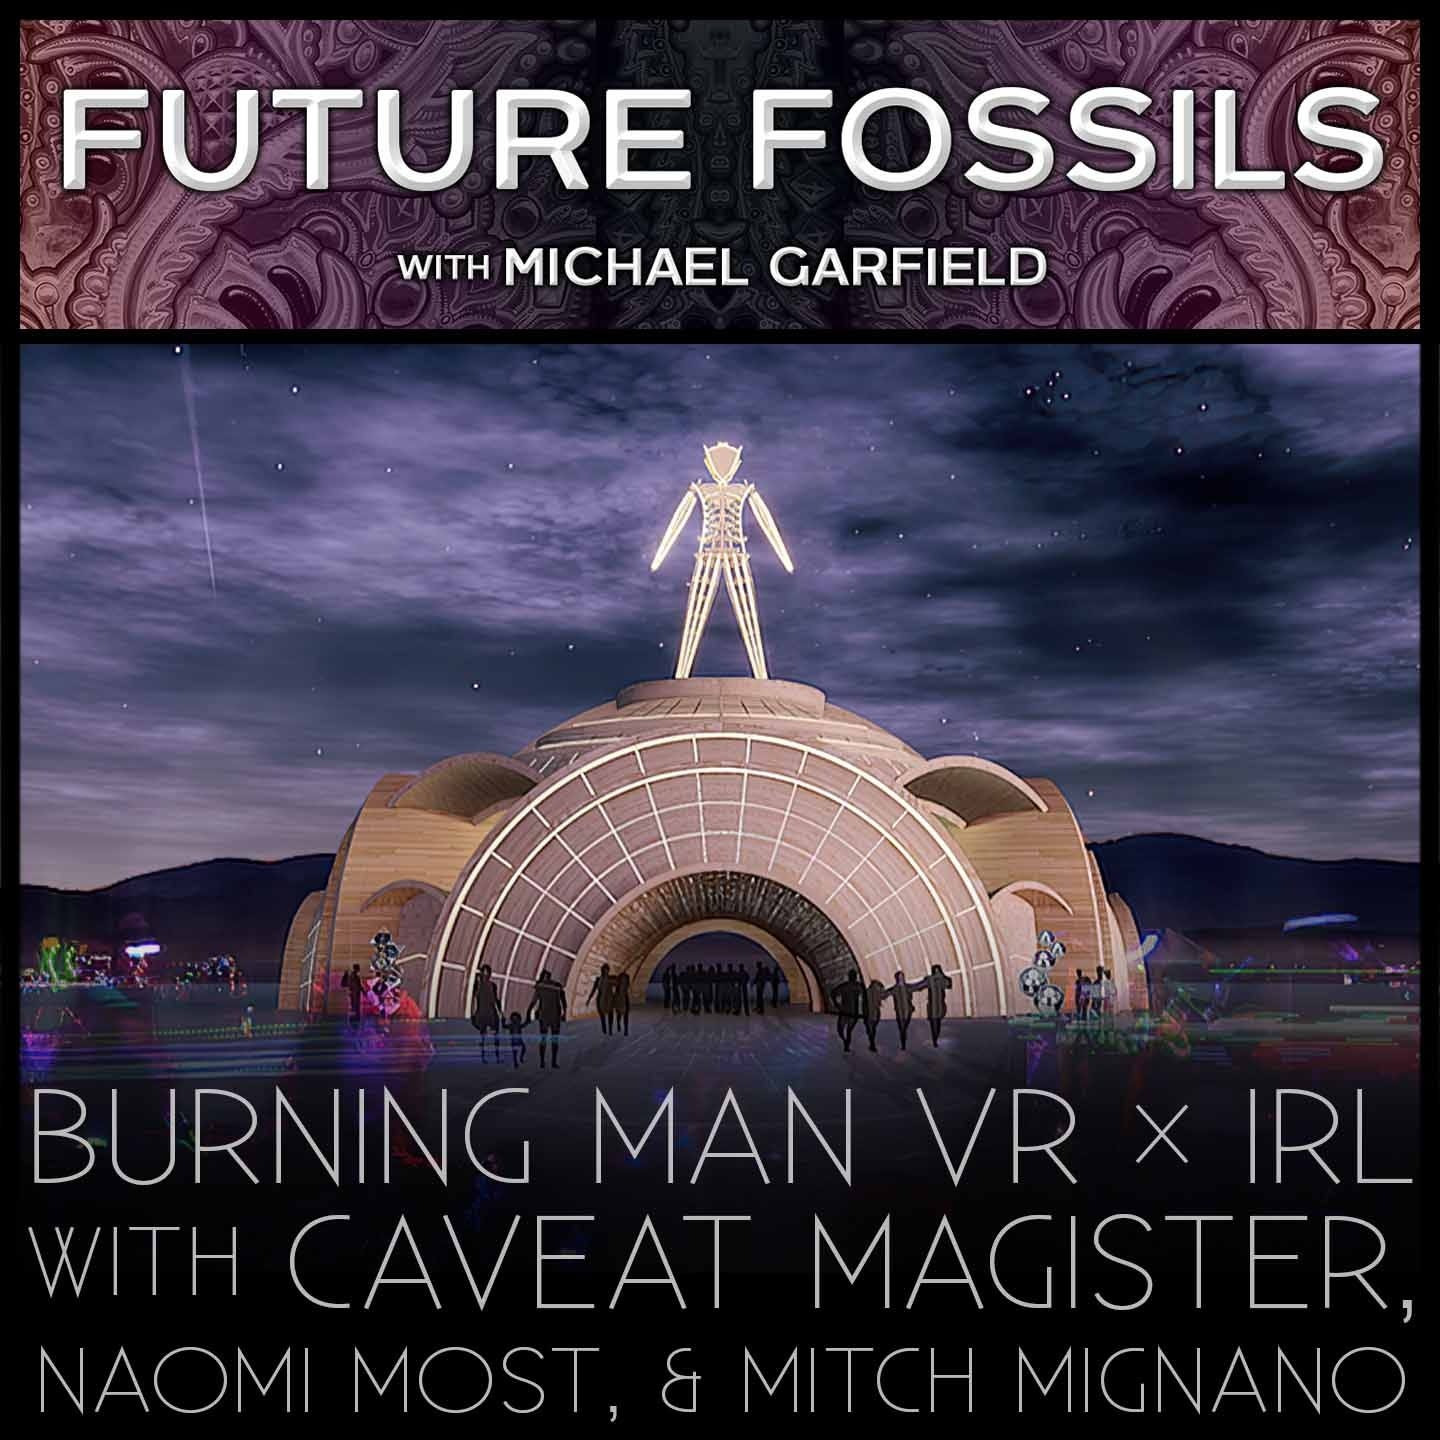 153 - Burning Man VR x IRL with Caveat Magister, Naomi Most, and Raven Mitch Mignano